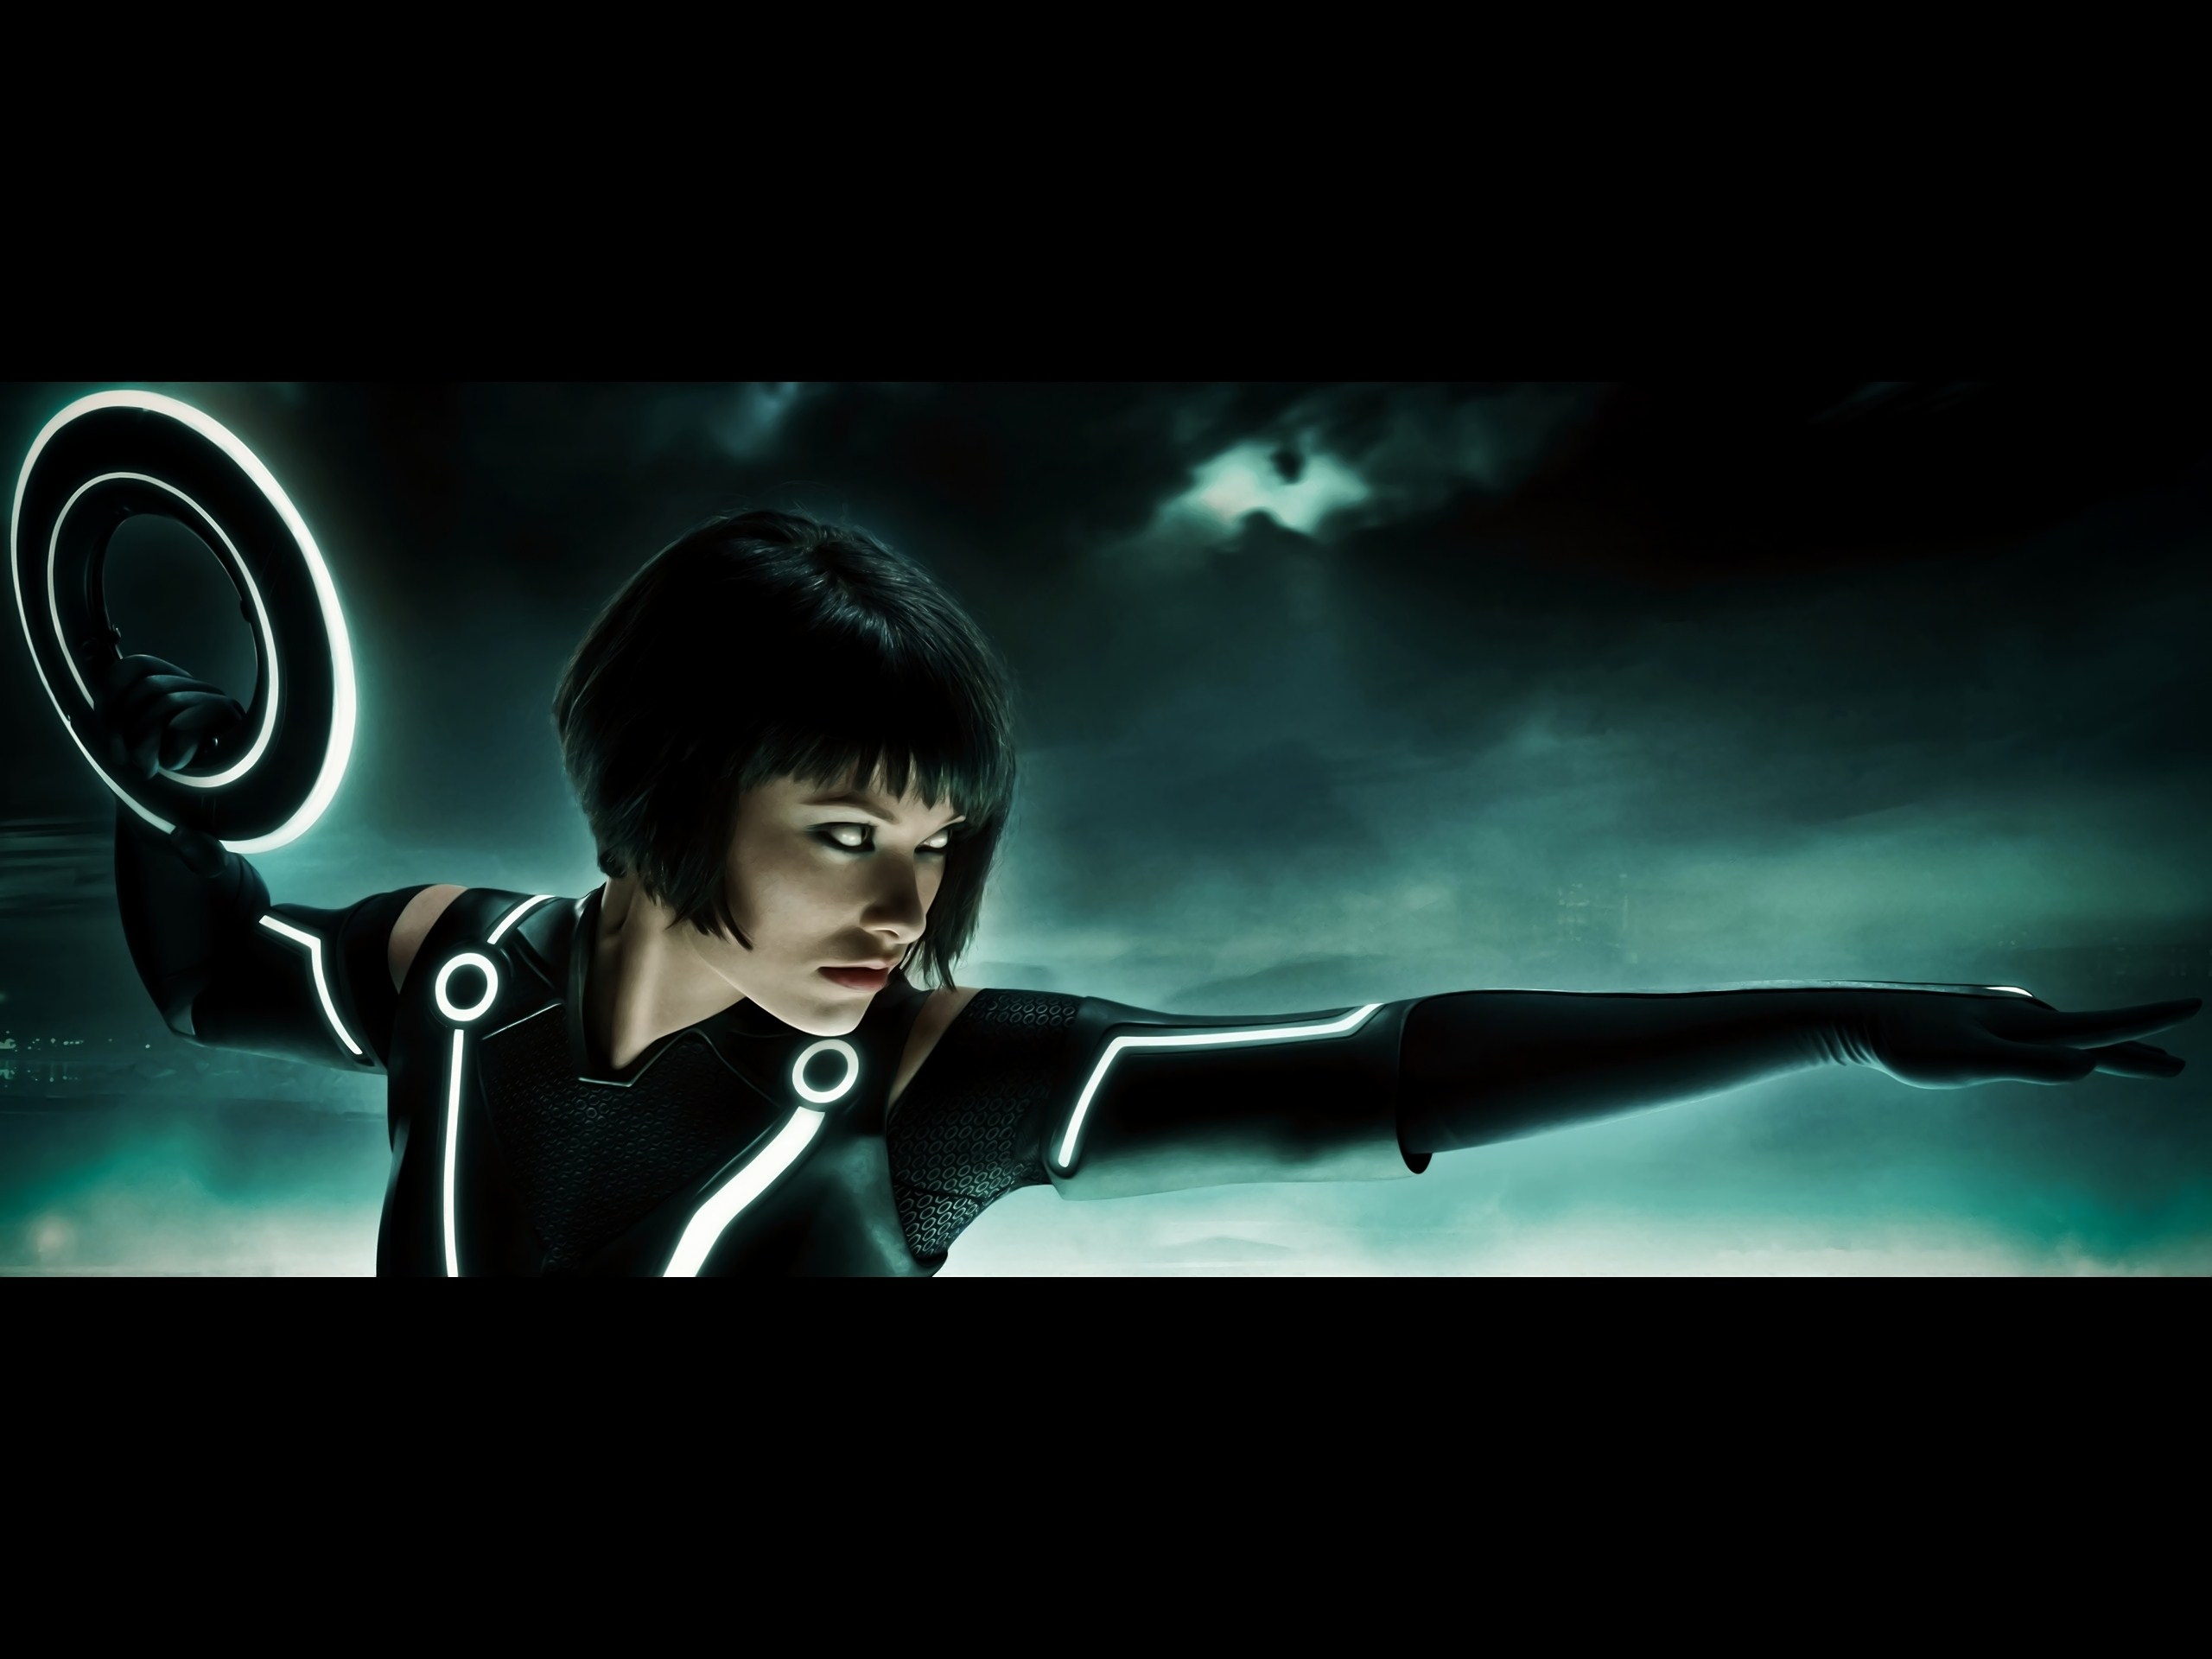 Crazy Hot Olivia Wilde From Tron Legacy Wallpaper Get